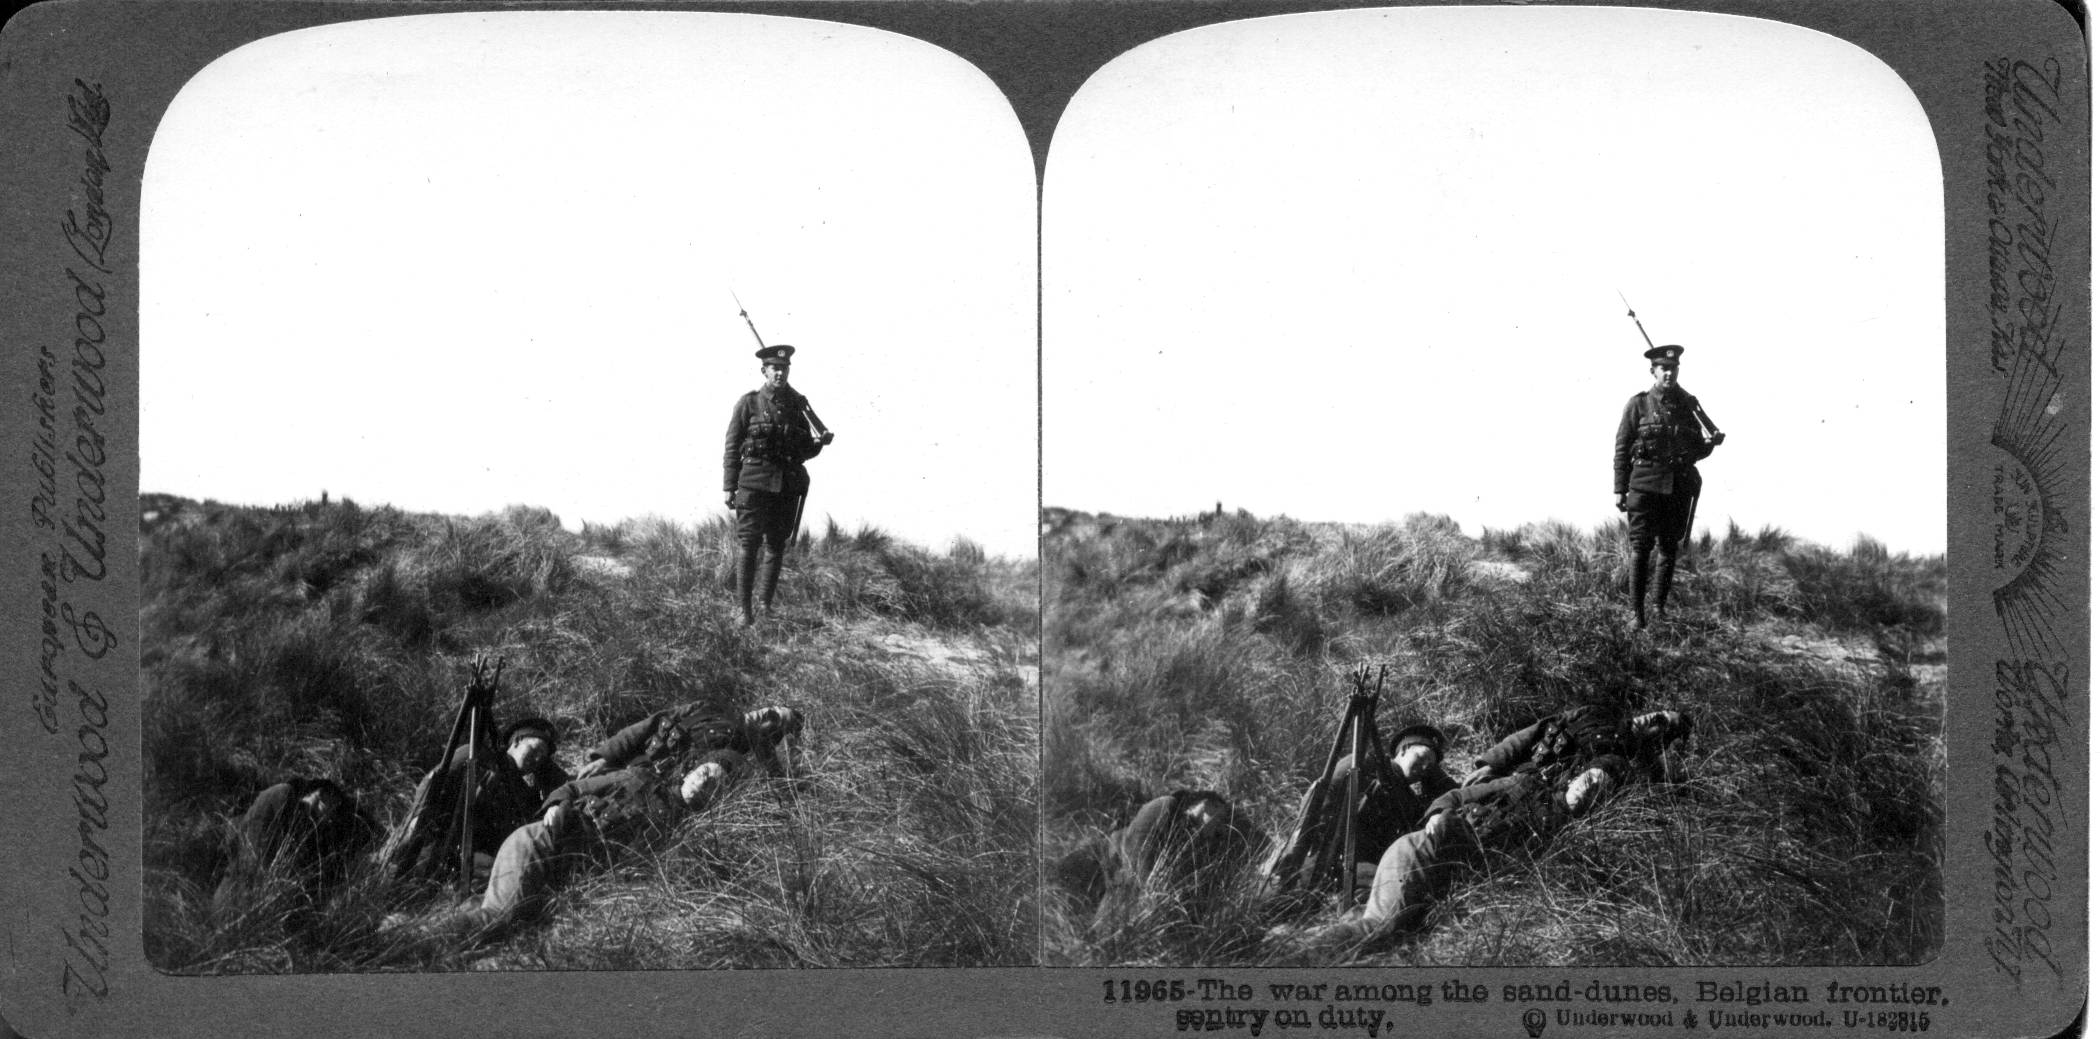 The war among the sand dunes, Belgian frontier, sentry on duty